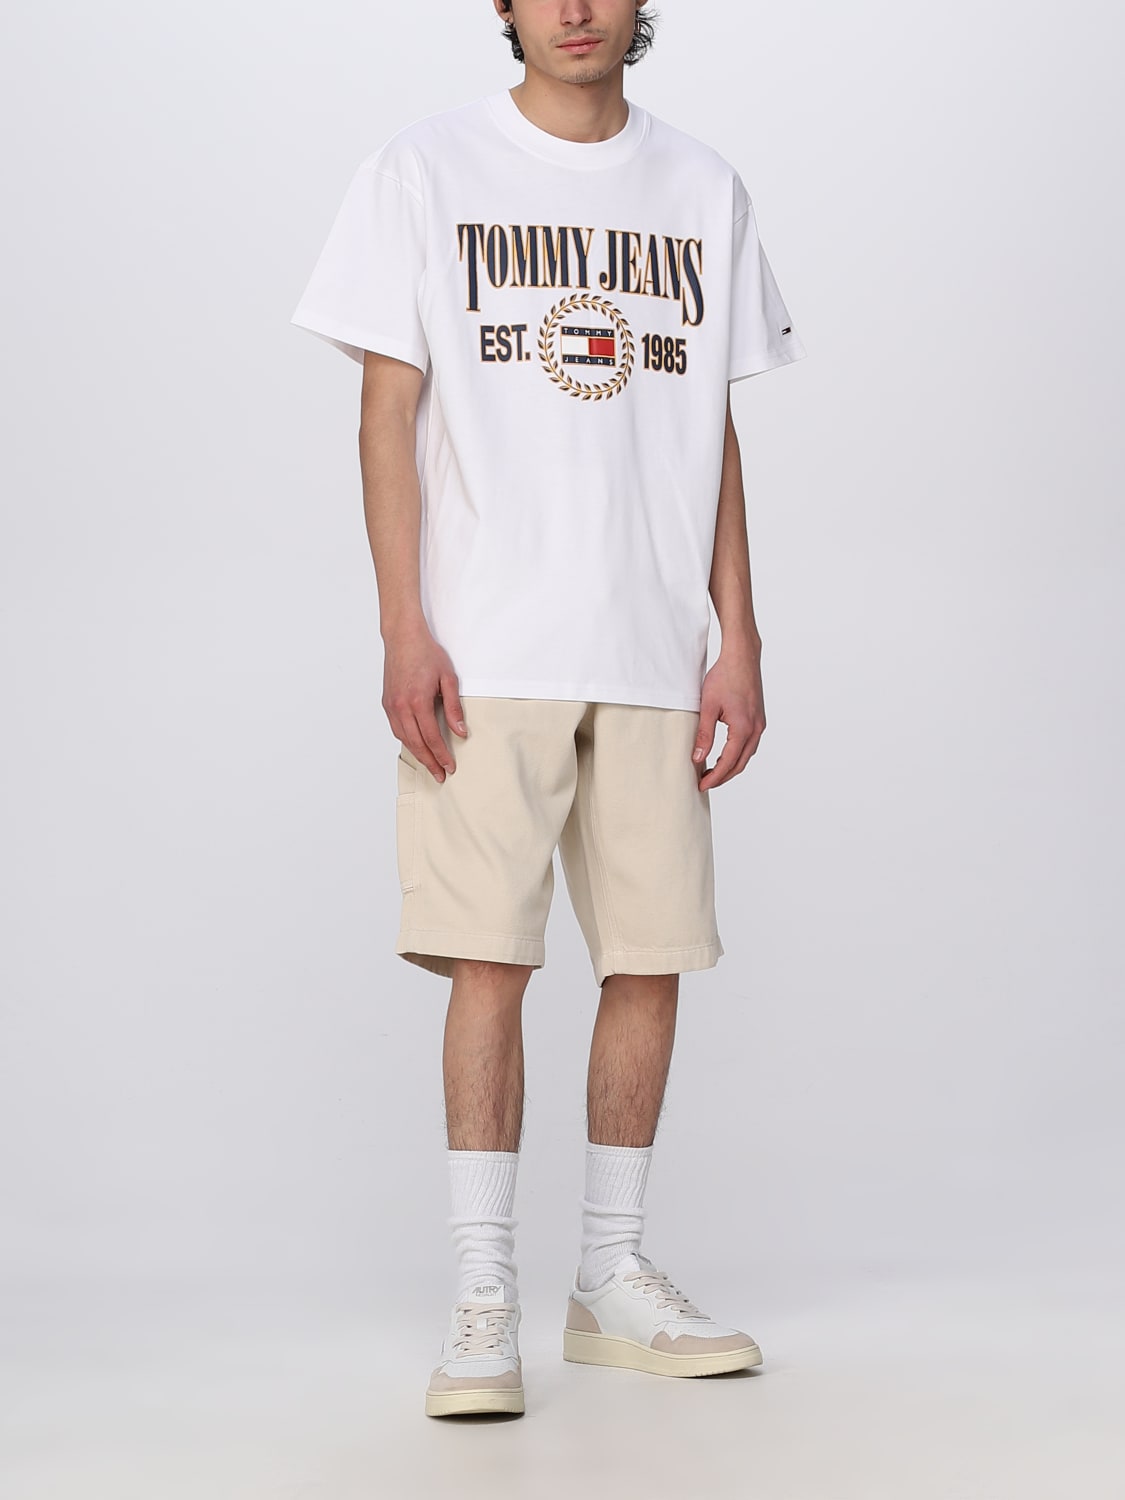 TOMMY JEANS: t-shirt for man White | Tommy Jeans t-shirt DM0DM16231 online on GIGLIO.COM